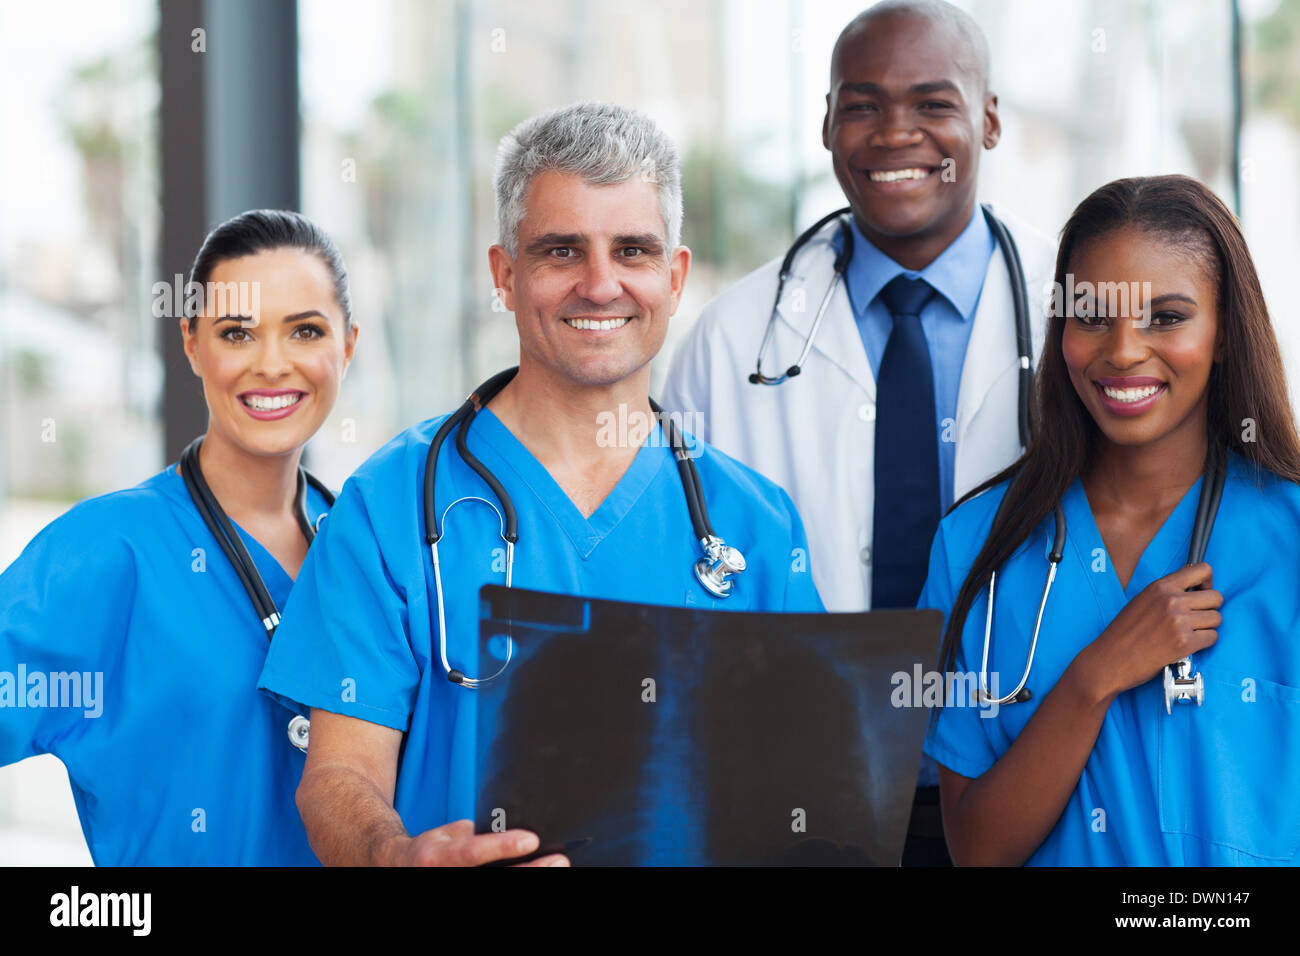 team of professional medical workers in hospital Stock Photo